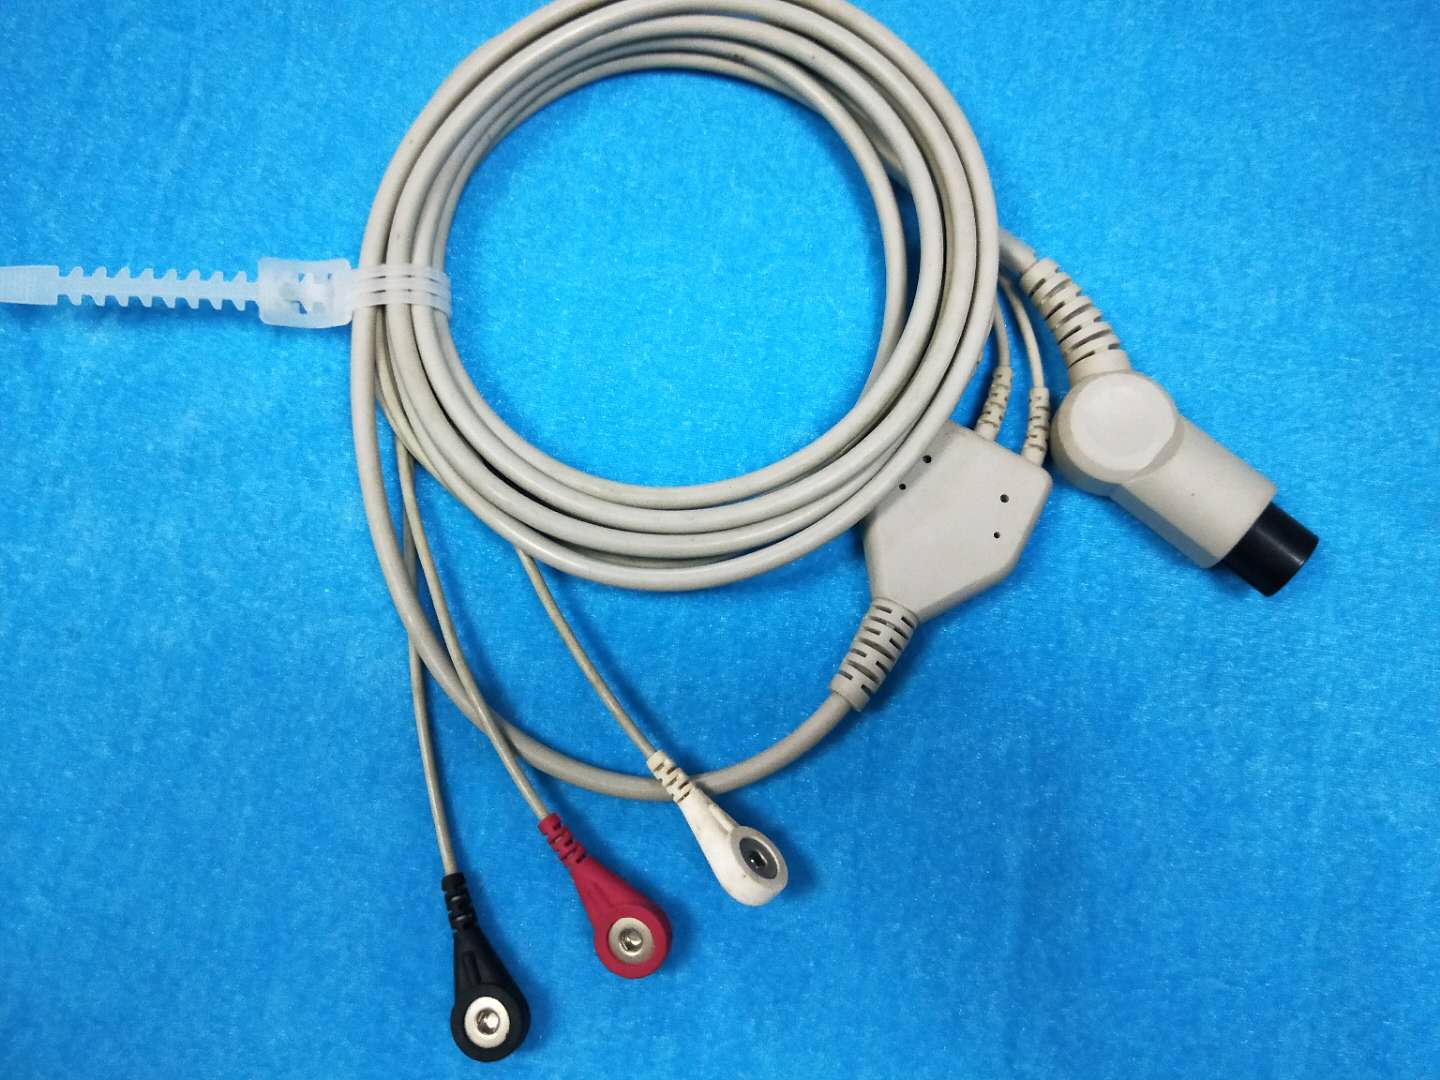 Medical equipment wire harness